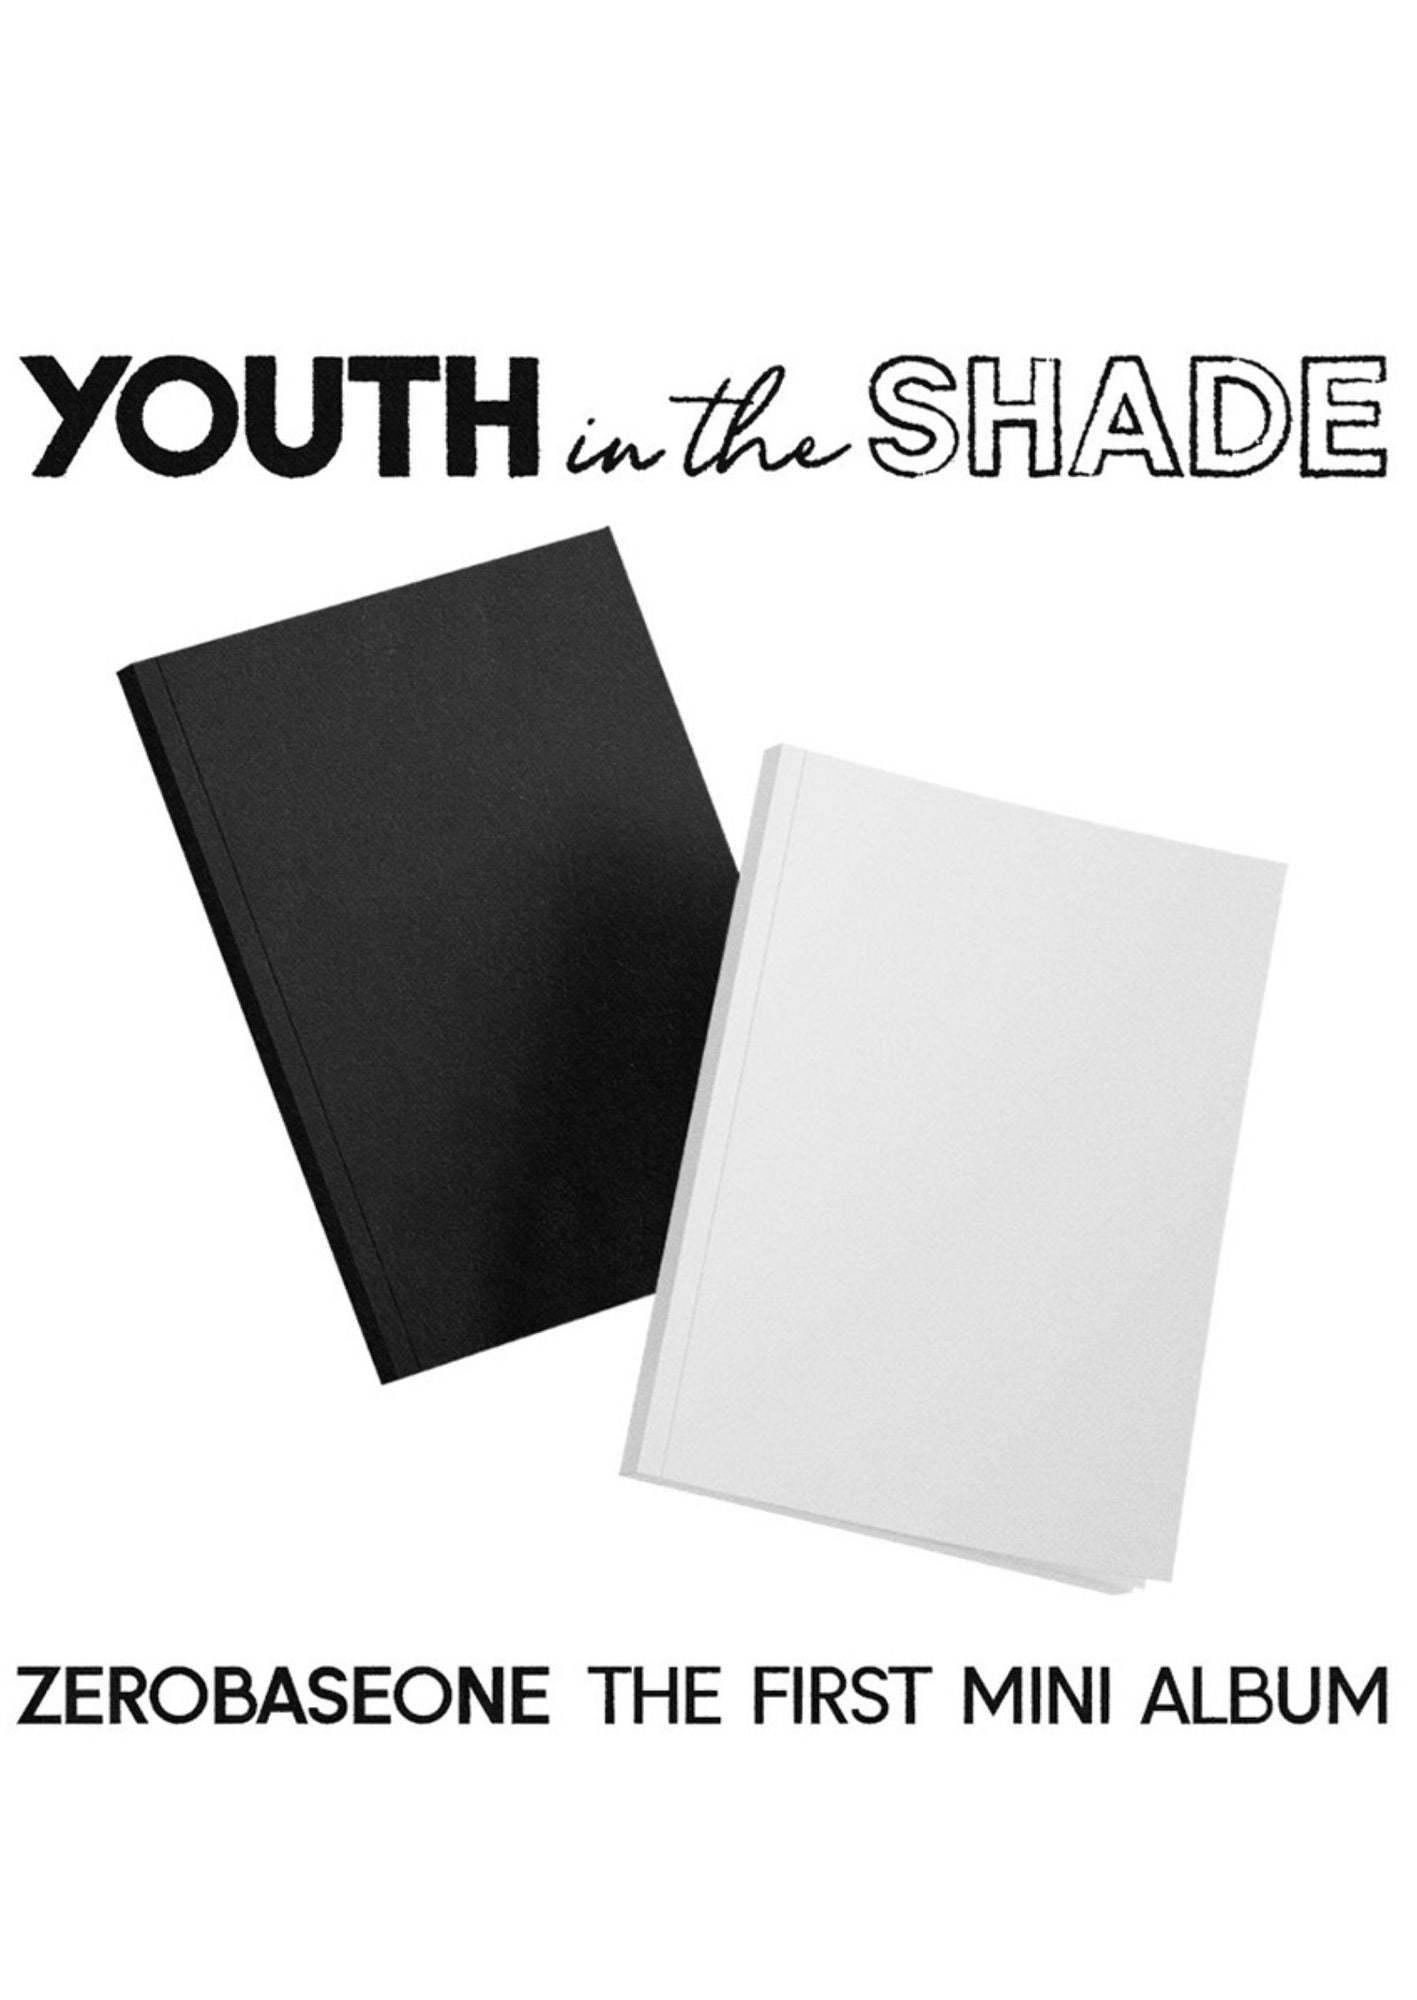 [ZEROBASEONE] Youth in the shade